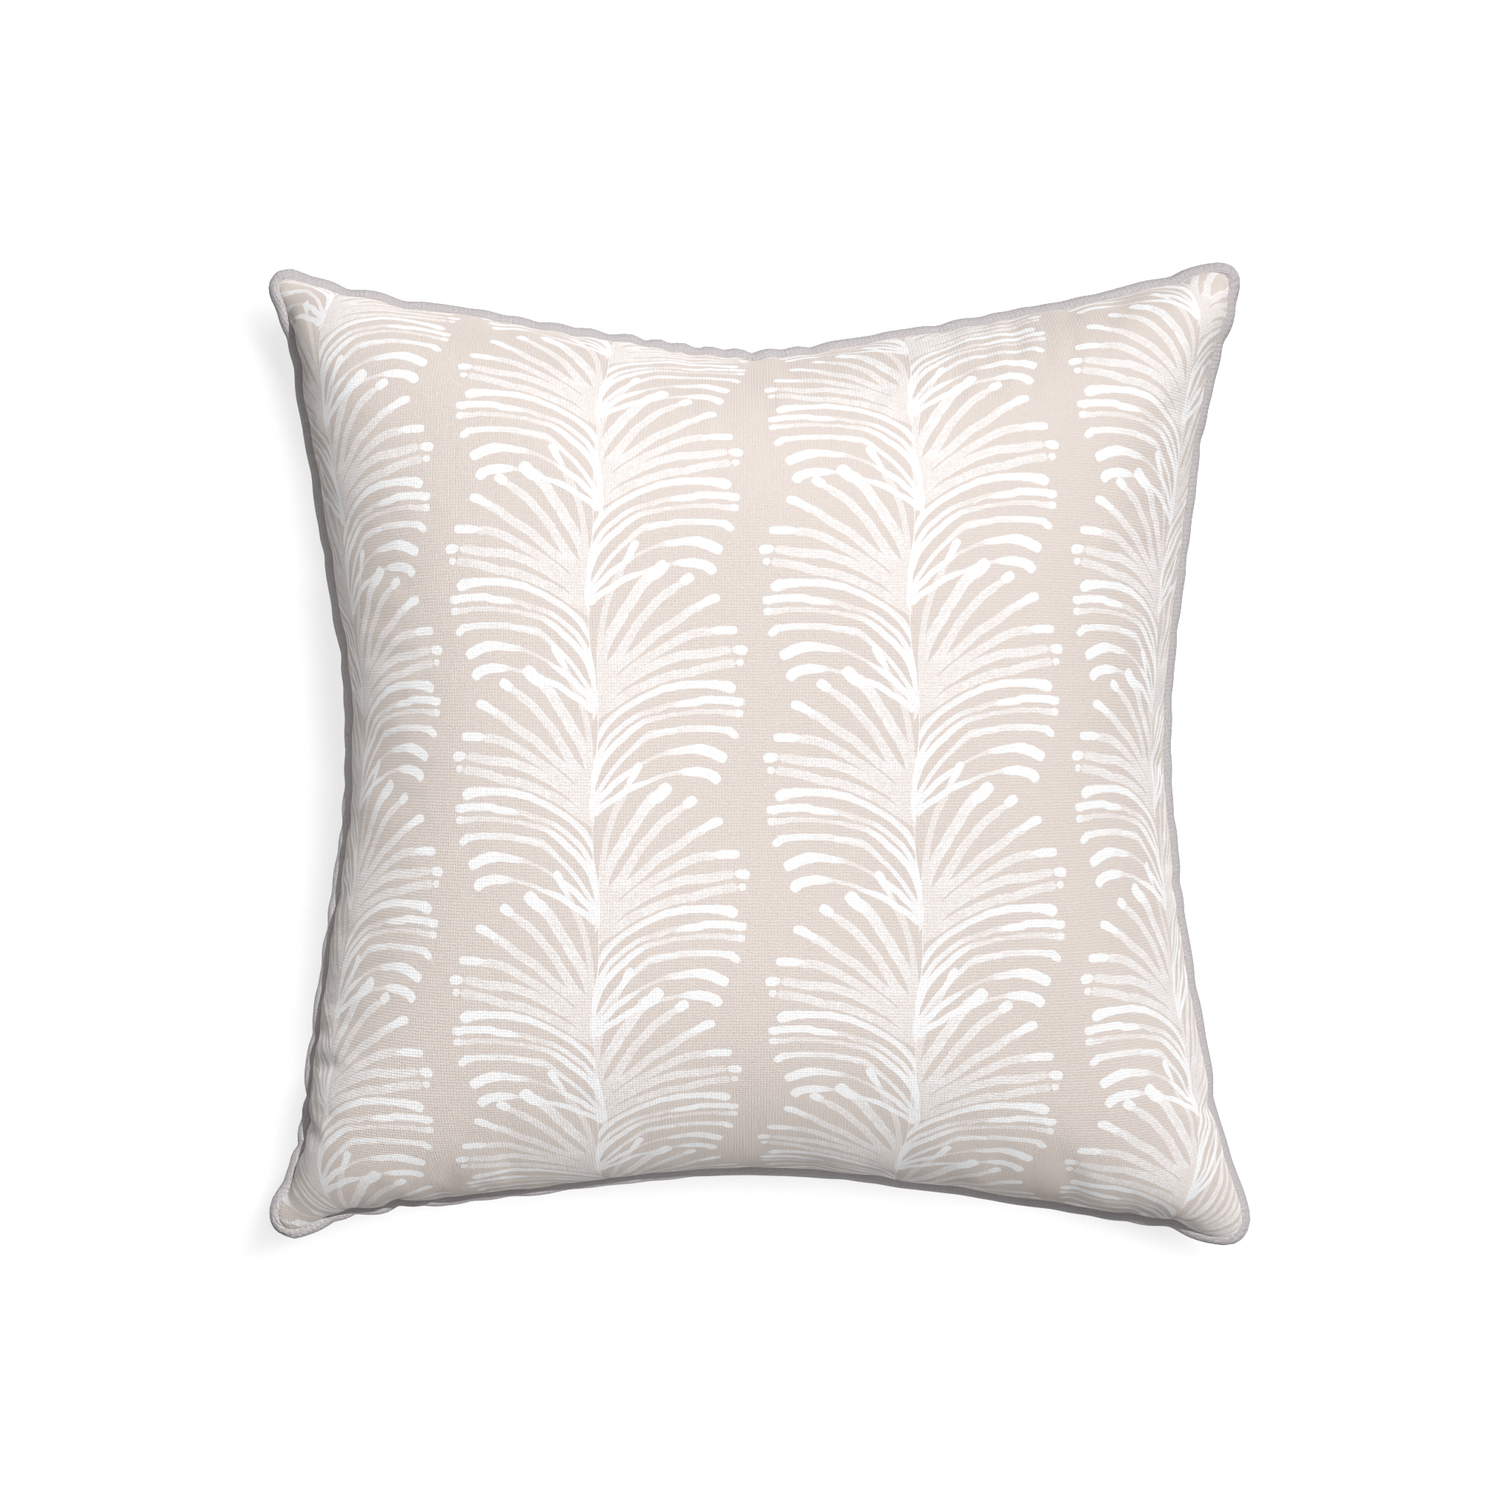 22-square emma sand custom sand colored botanical stripepillow with pebble piping on white background